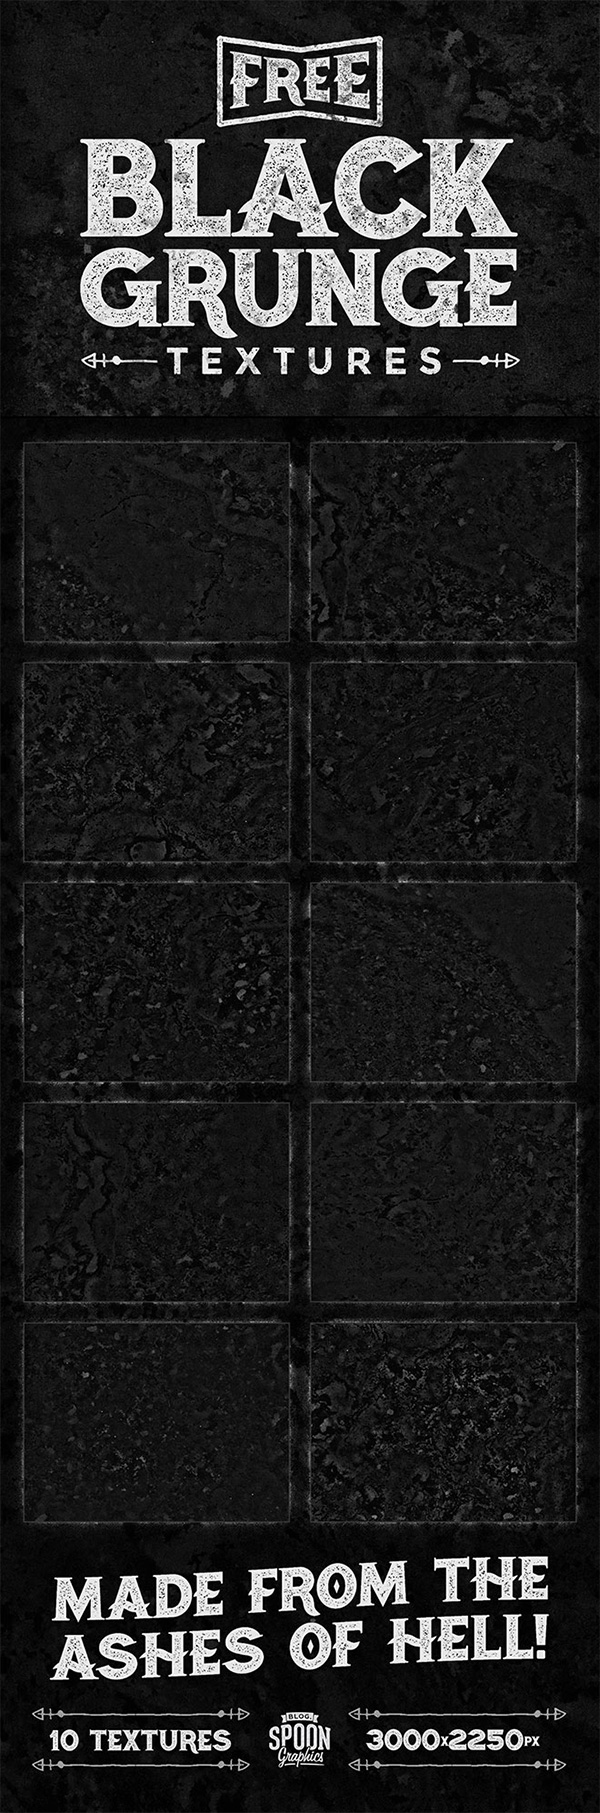 10 Free Black Grunge Textures Made From The Ashes of Hell